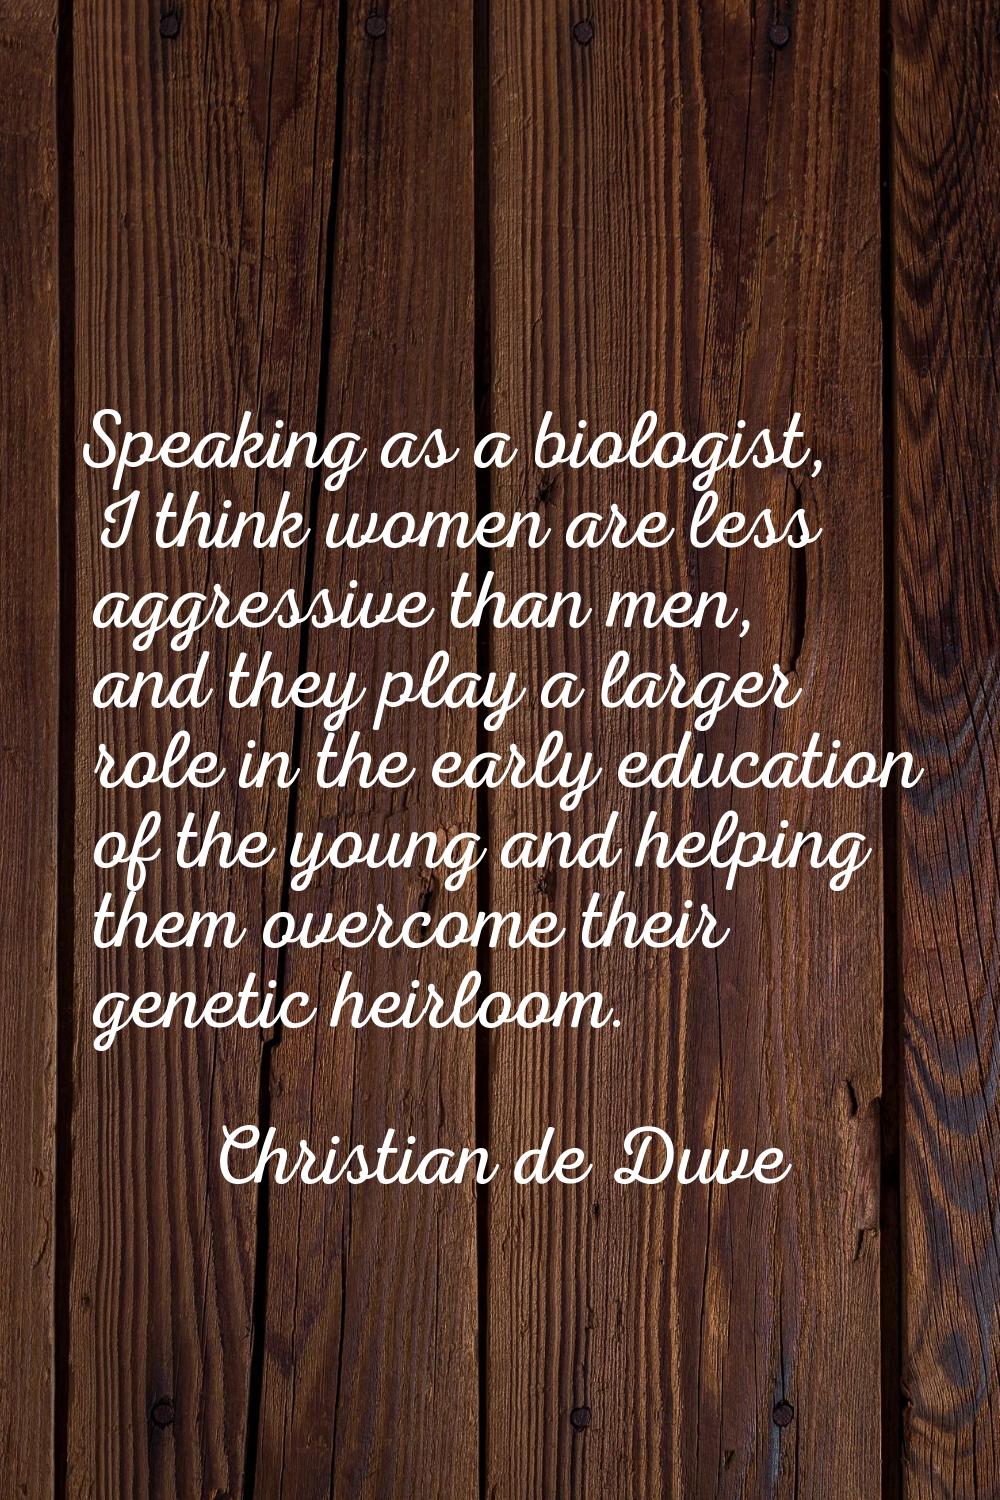 Speaking as a biologist, I think women are less aggressive than men, and they play a larger role in